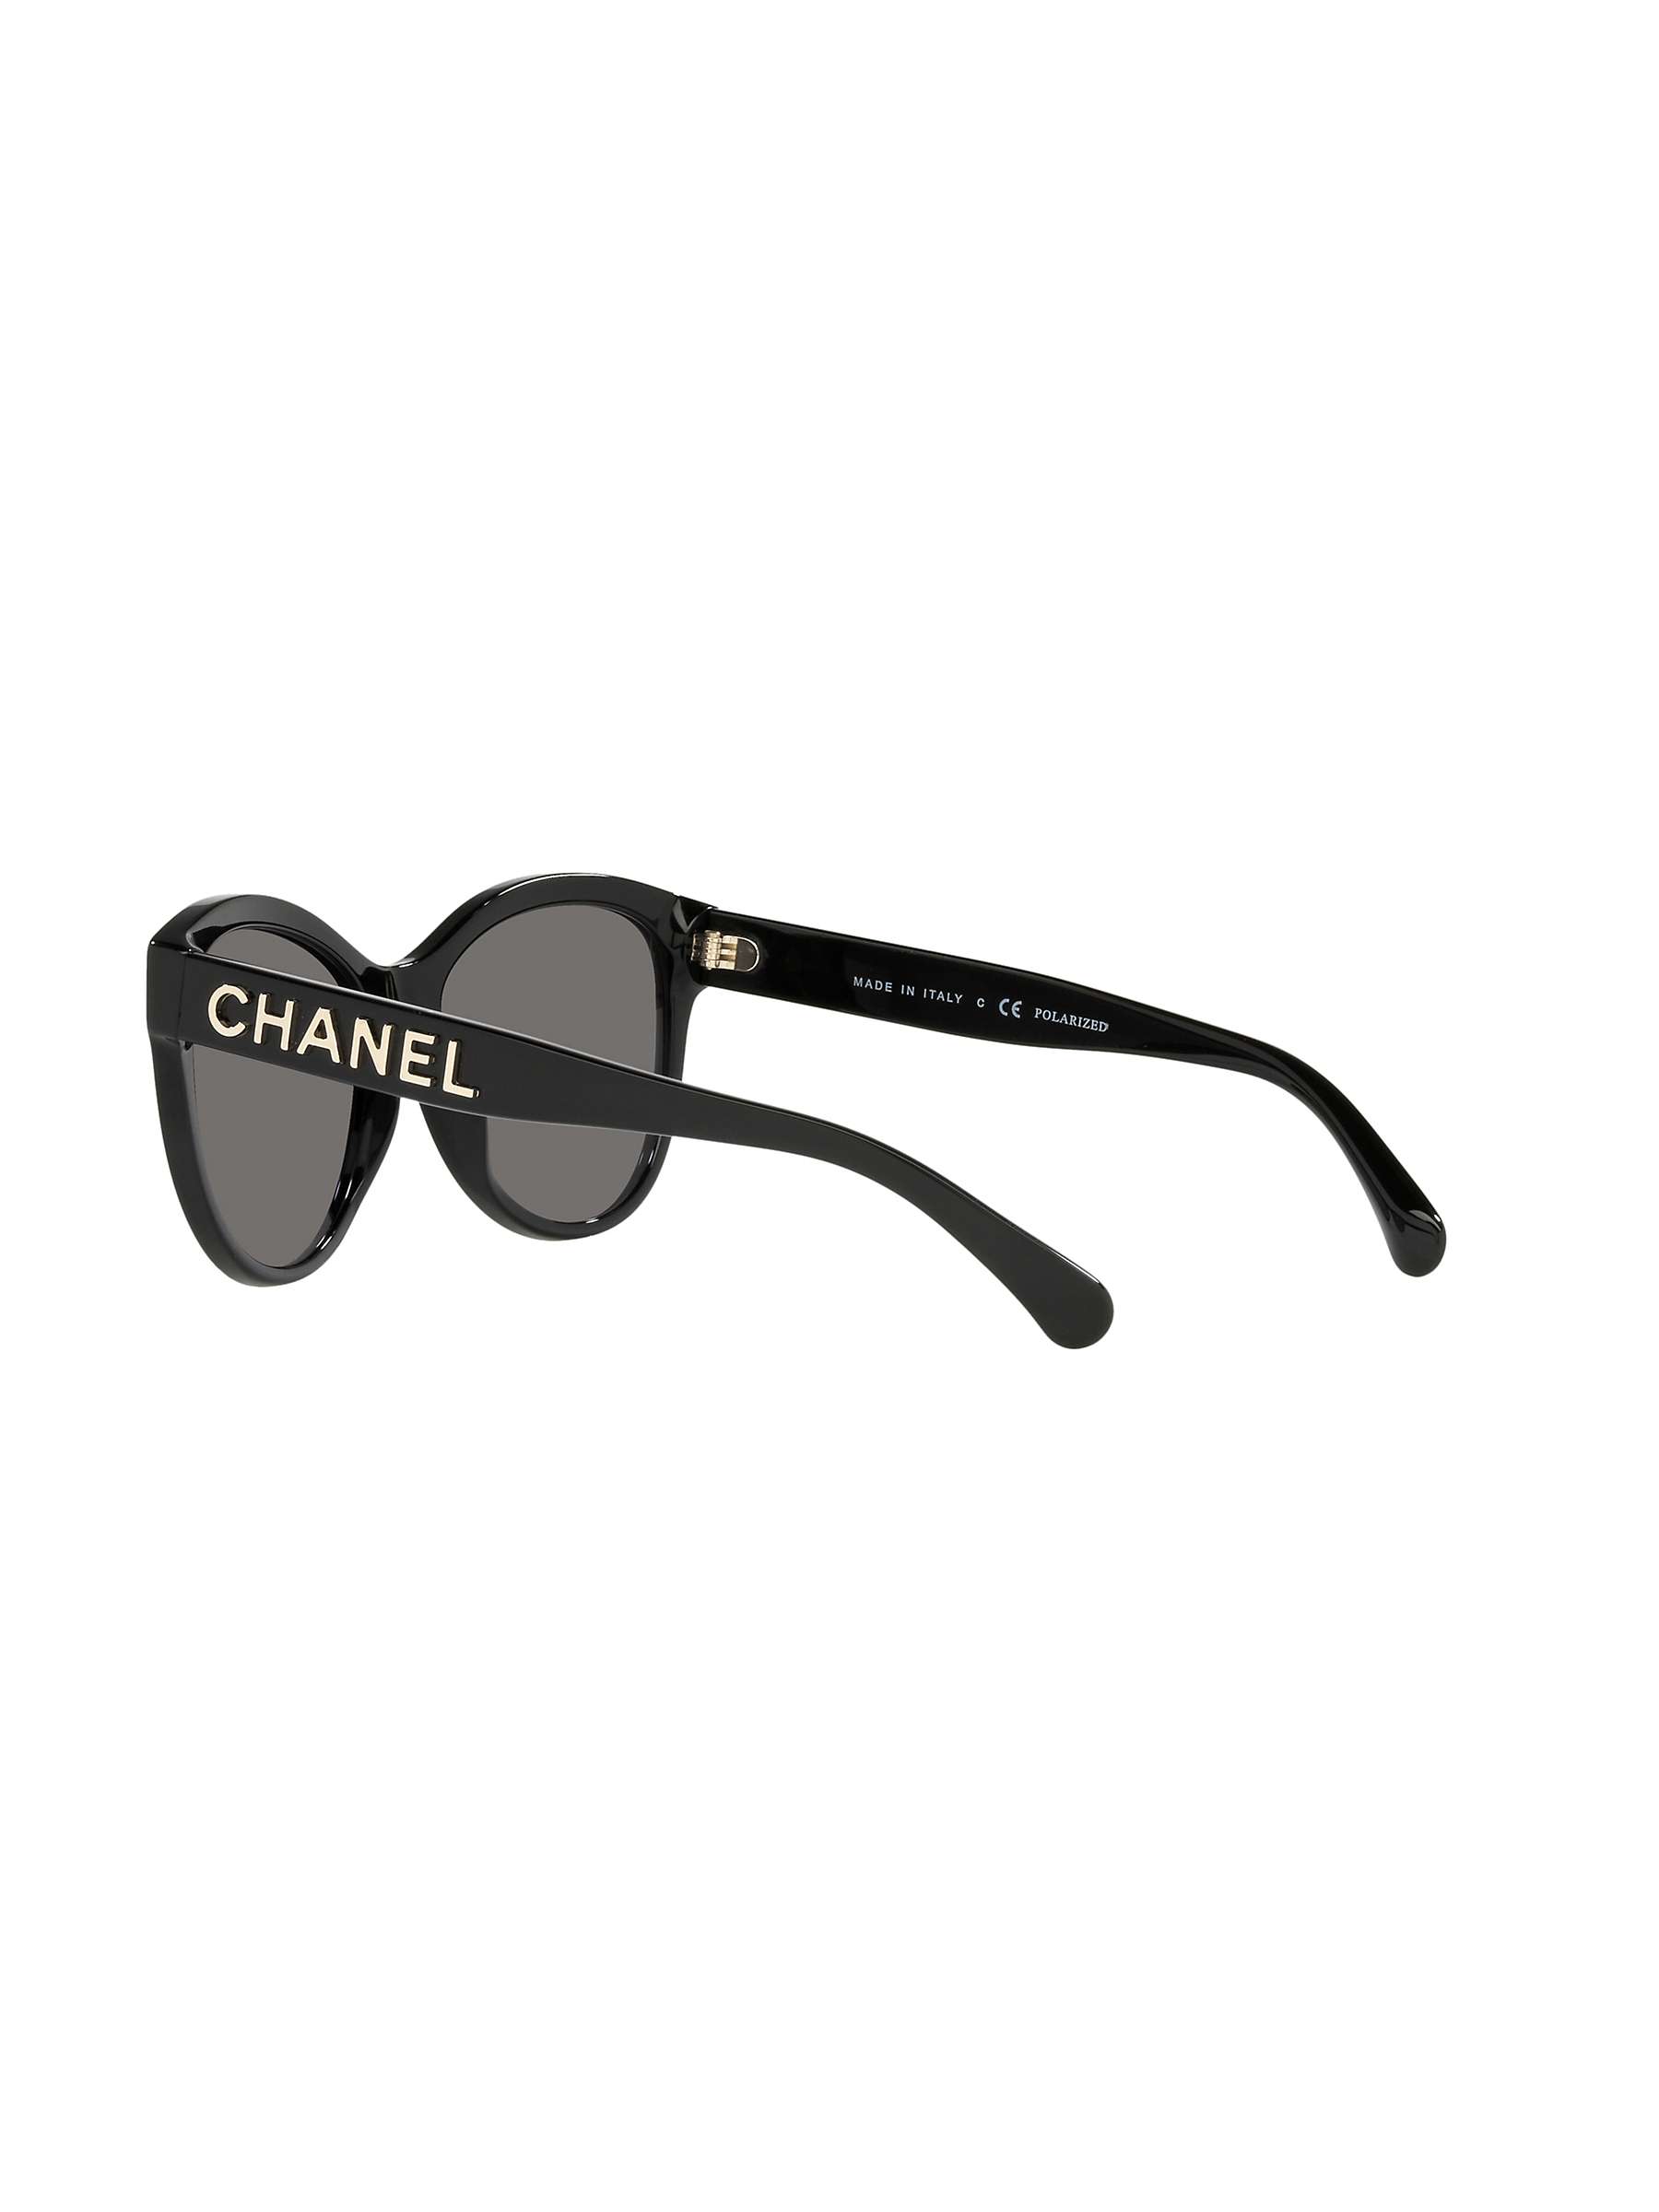 Buy CHANEL CH5458 Women's Polarised Oval Sunglasses, Black/Grey Online at johnlewis.com